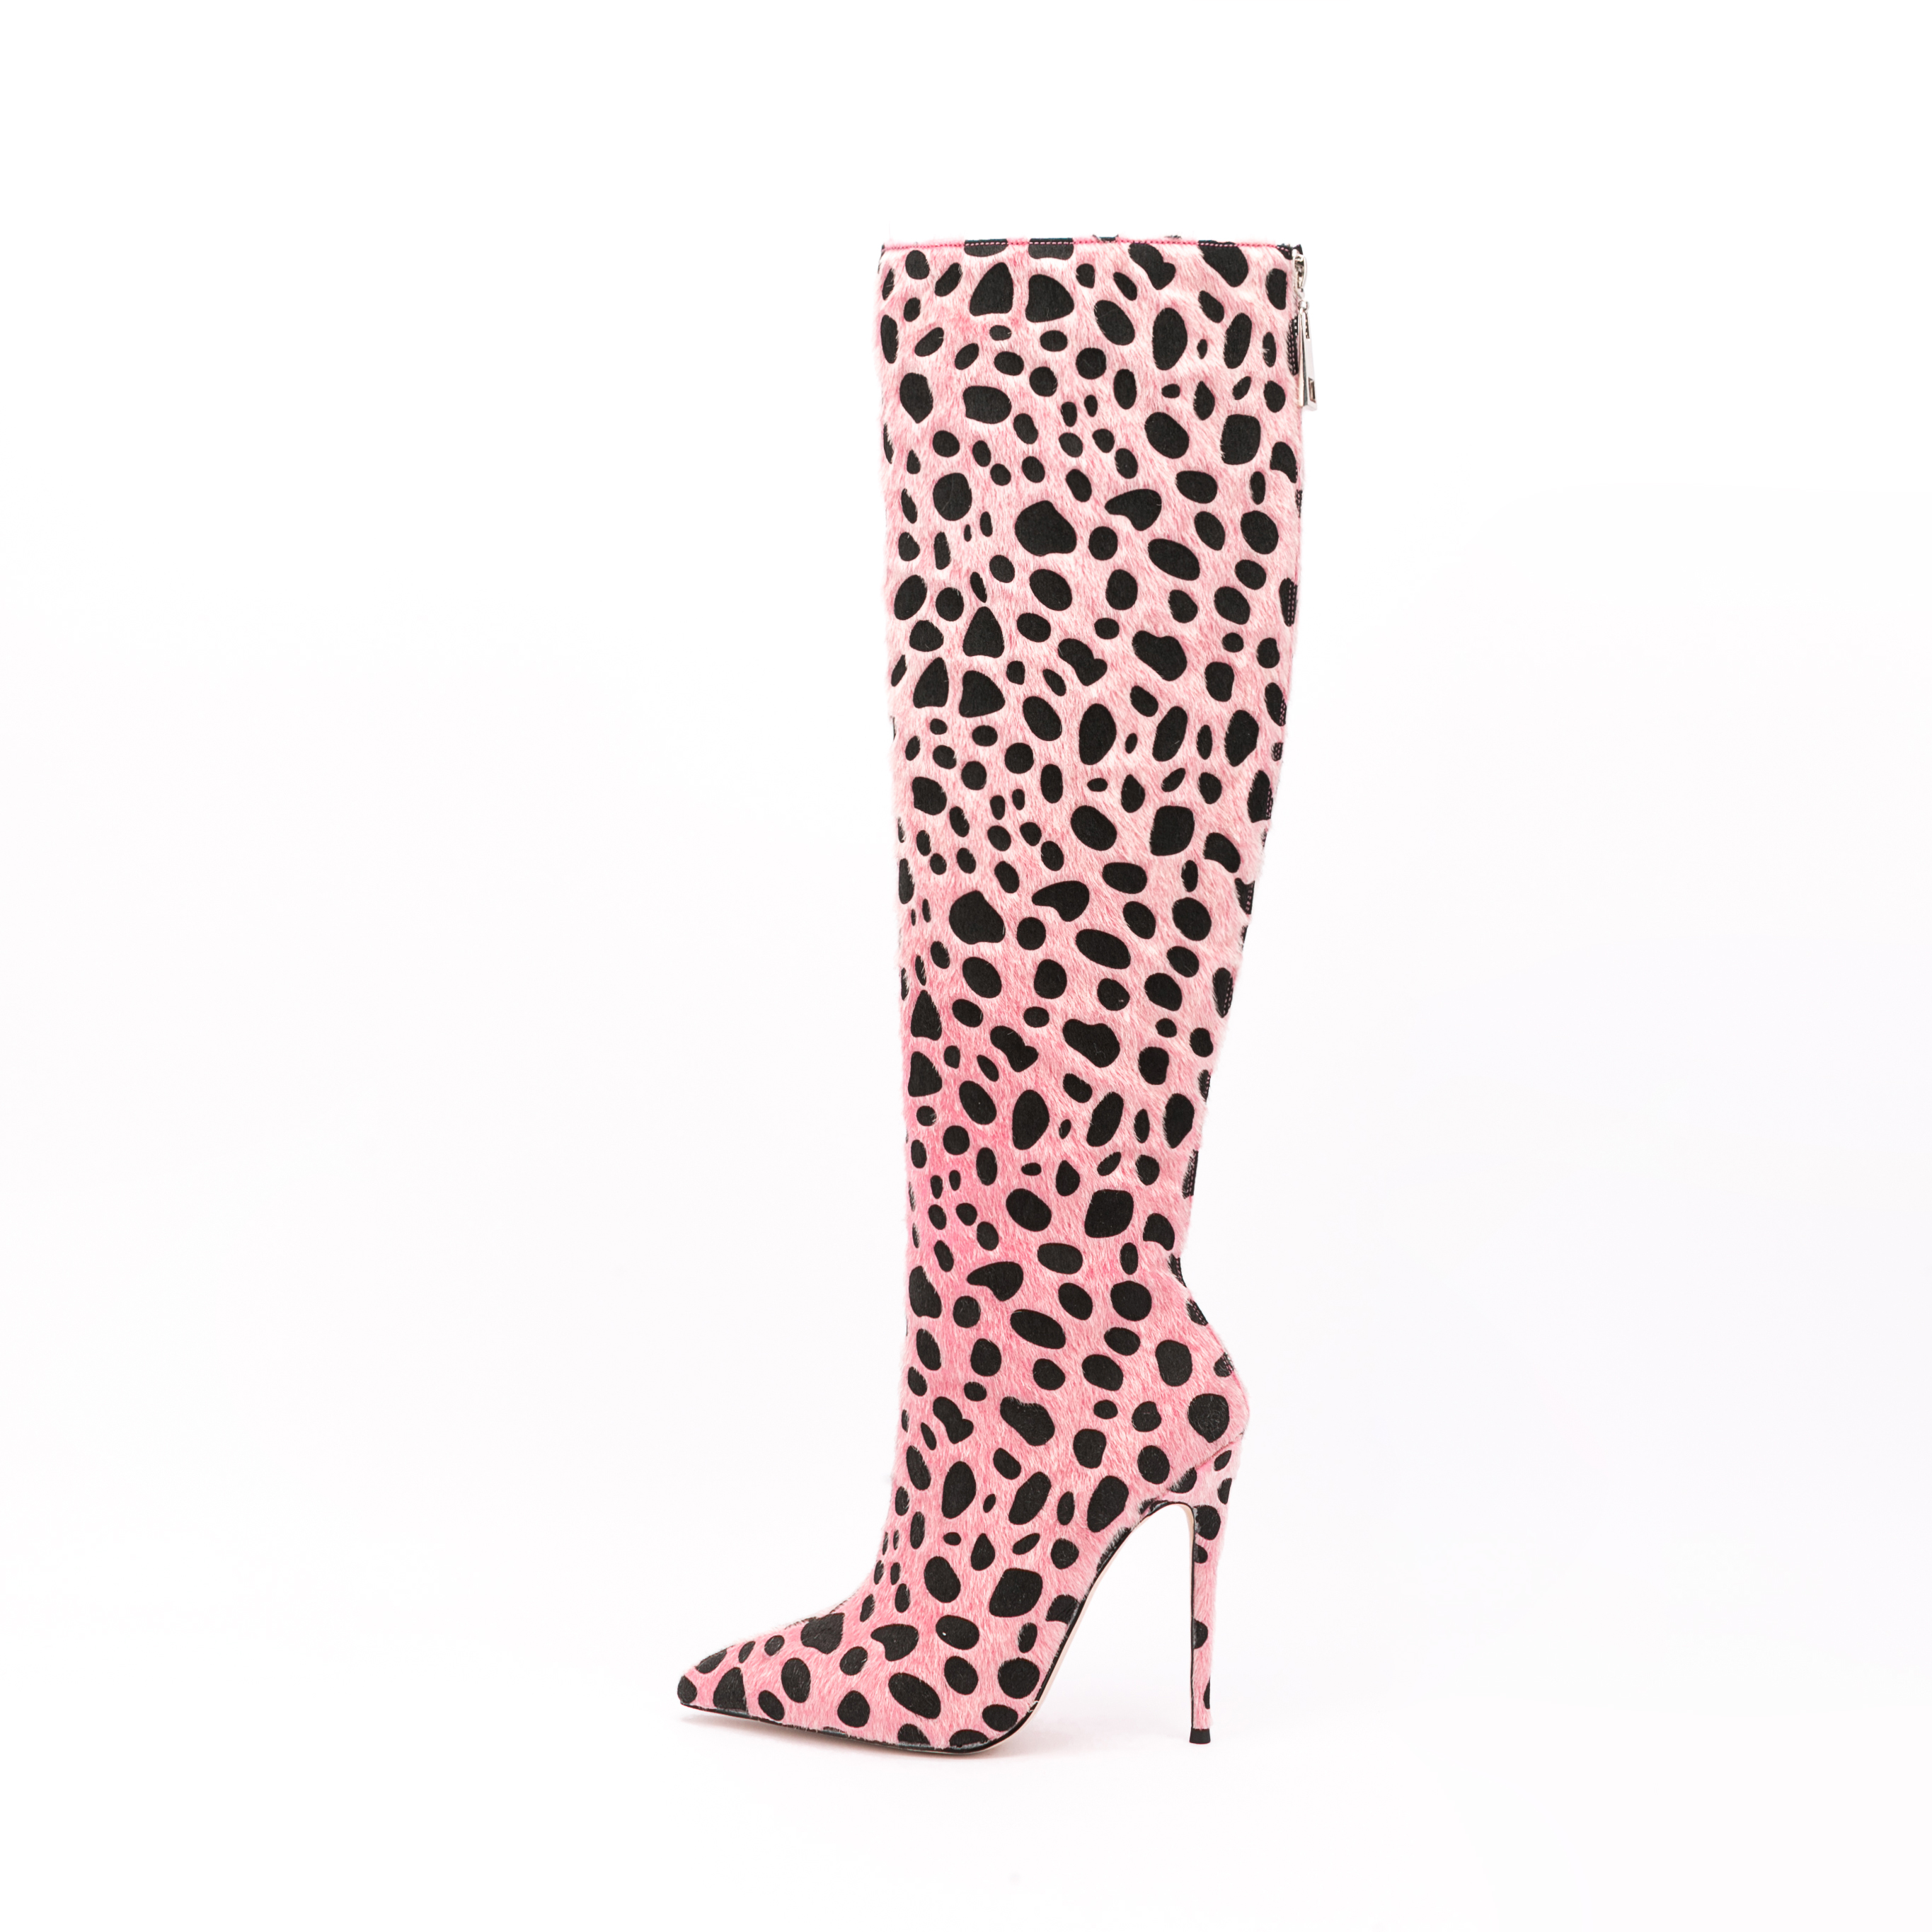 TAAFO Pink Animal Print Pointed Ladies Knee High Boots Faux Leopard Print Horsehair High Heels Boots For Women